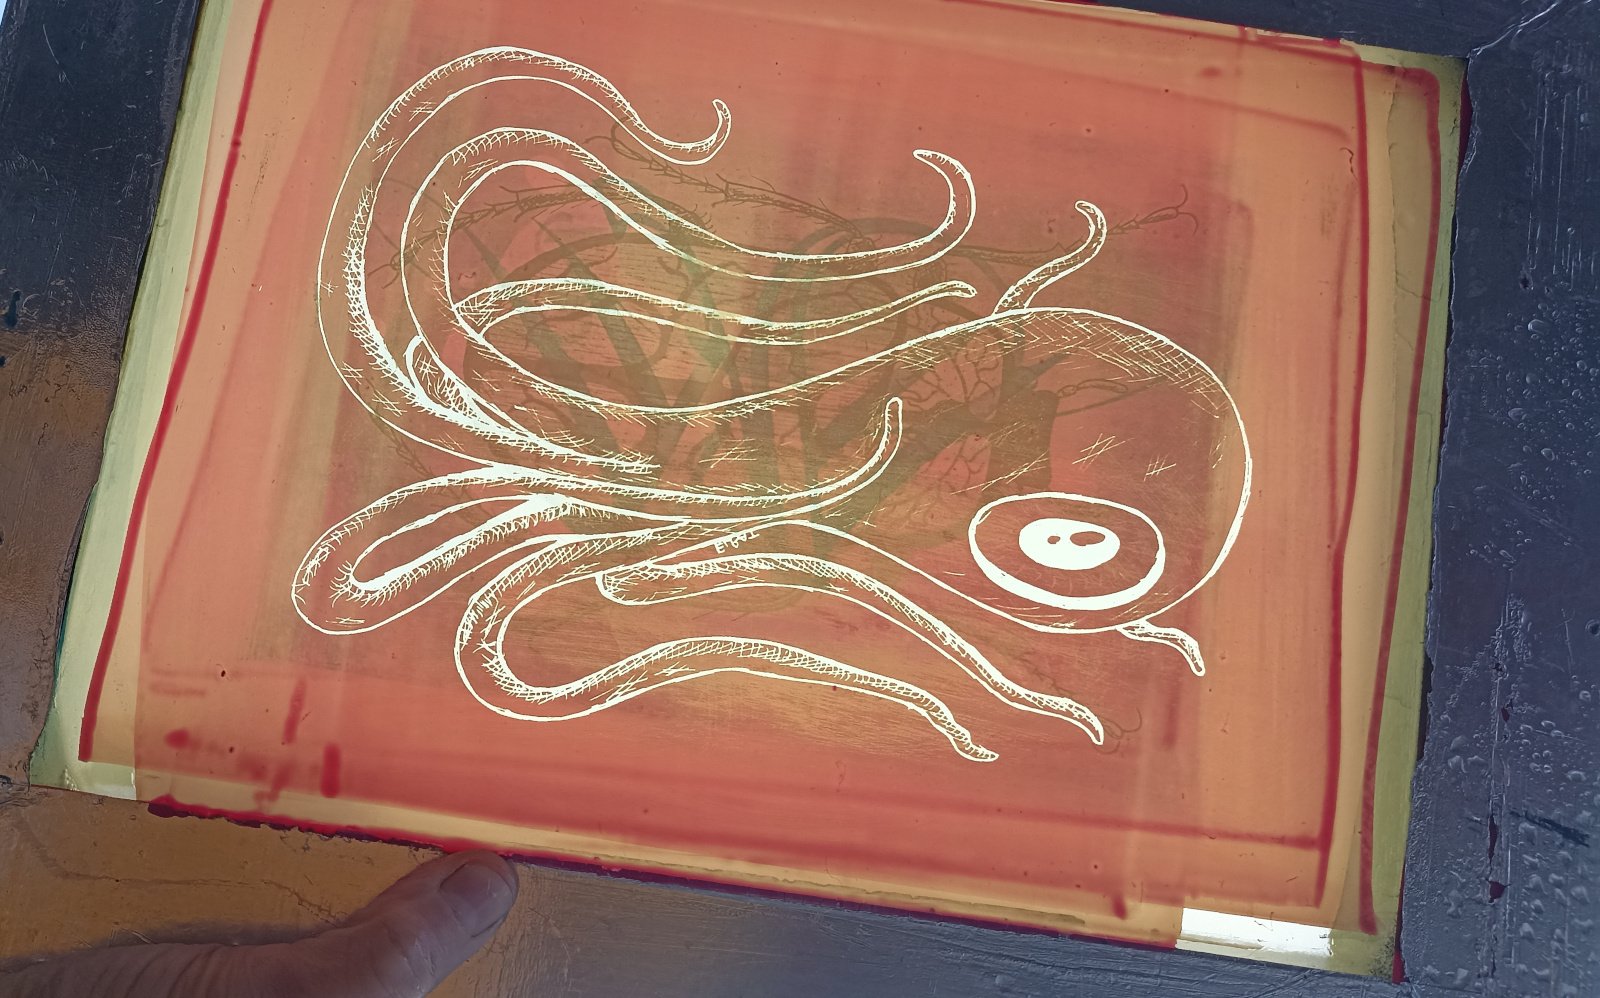 Octoclops screen, burned and ready to print. ElRat at work